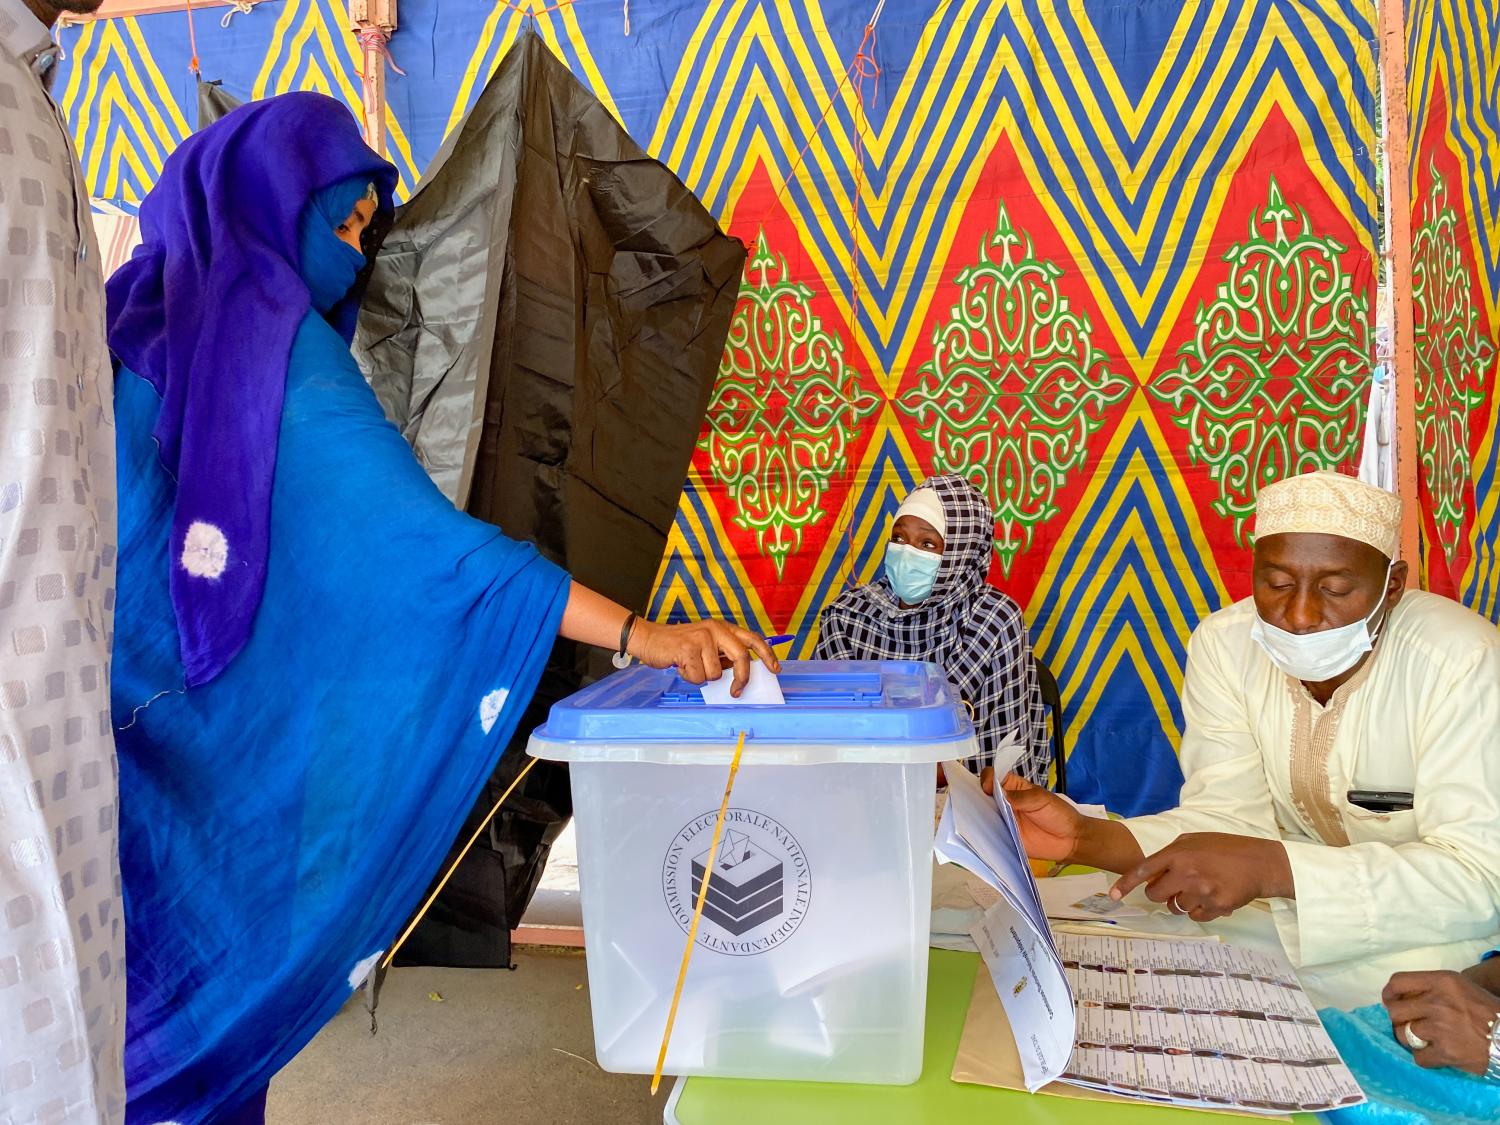 A woman casts her ballot at the pooling station during the presidential election in N'Djamena, Chad April 11, 2021. REUTERS/ Media Coulibaly NO RESALES. NO ARCHIVES